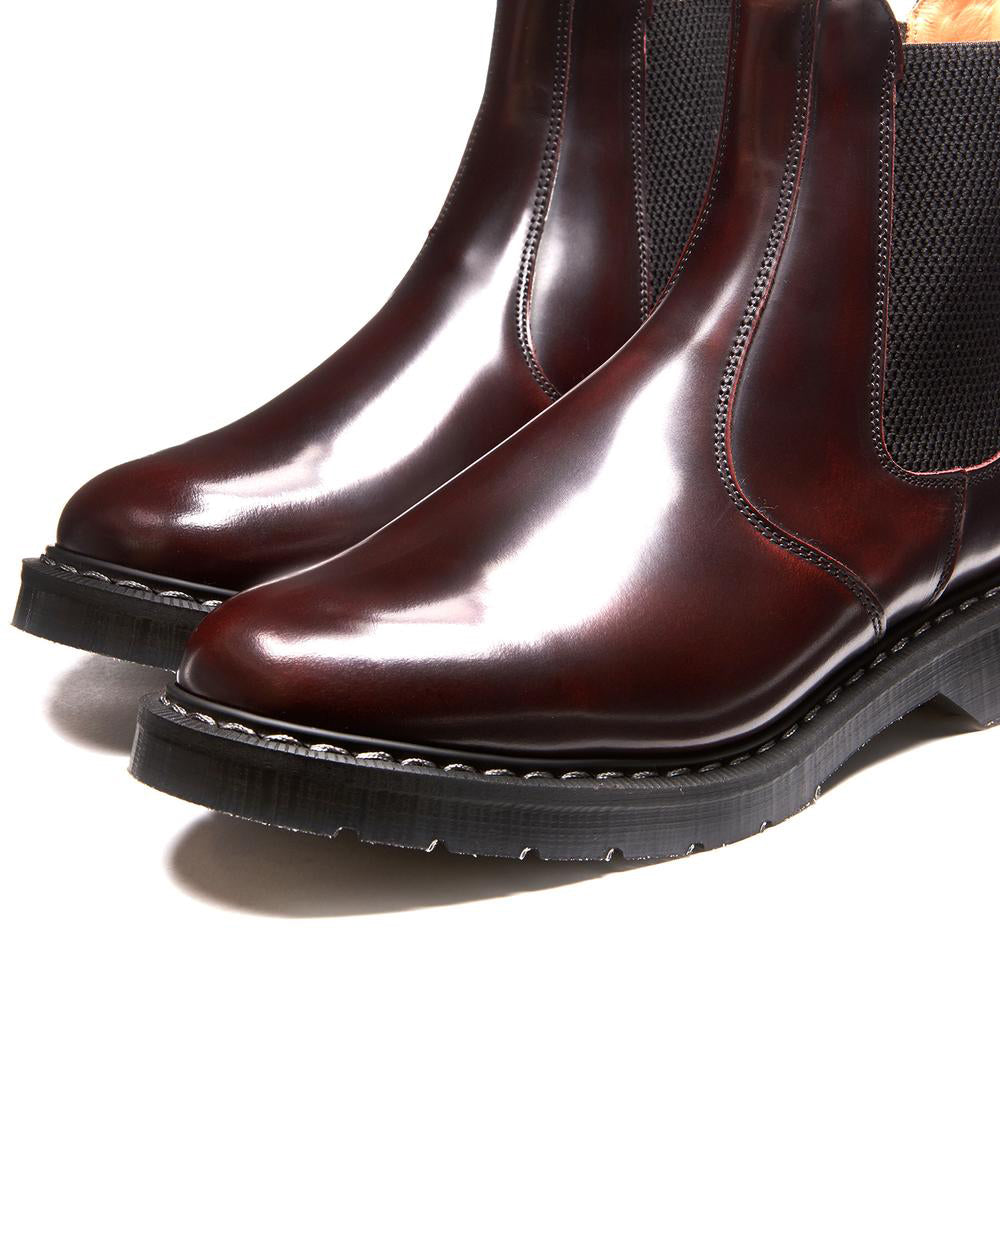 Dr. Martens vs Solovair - The Great British Boot Off 